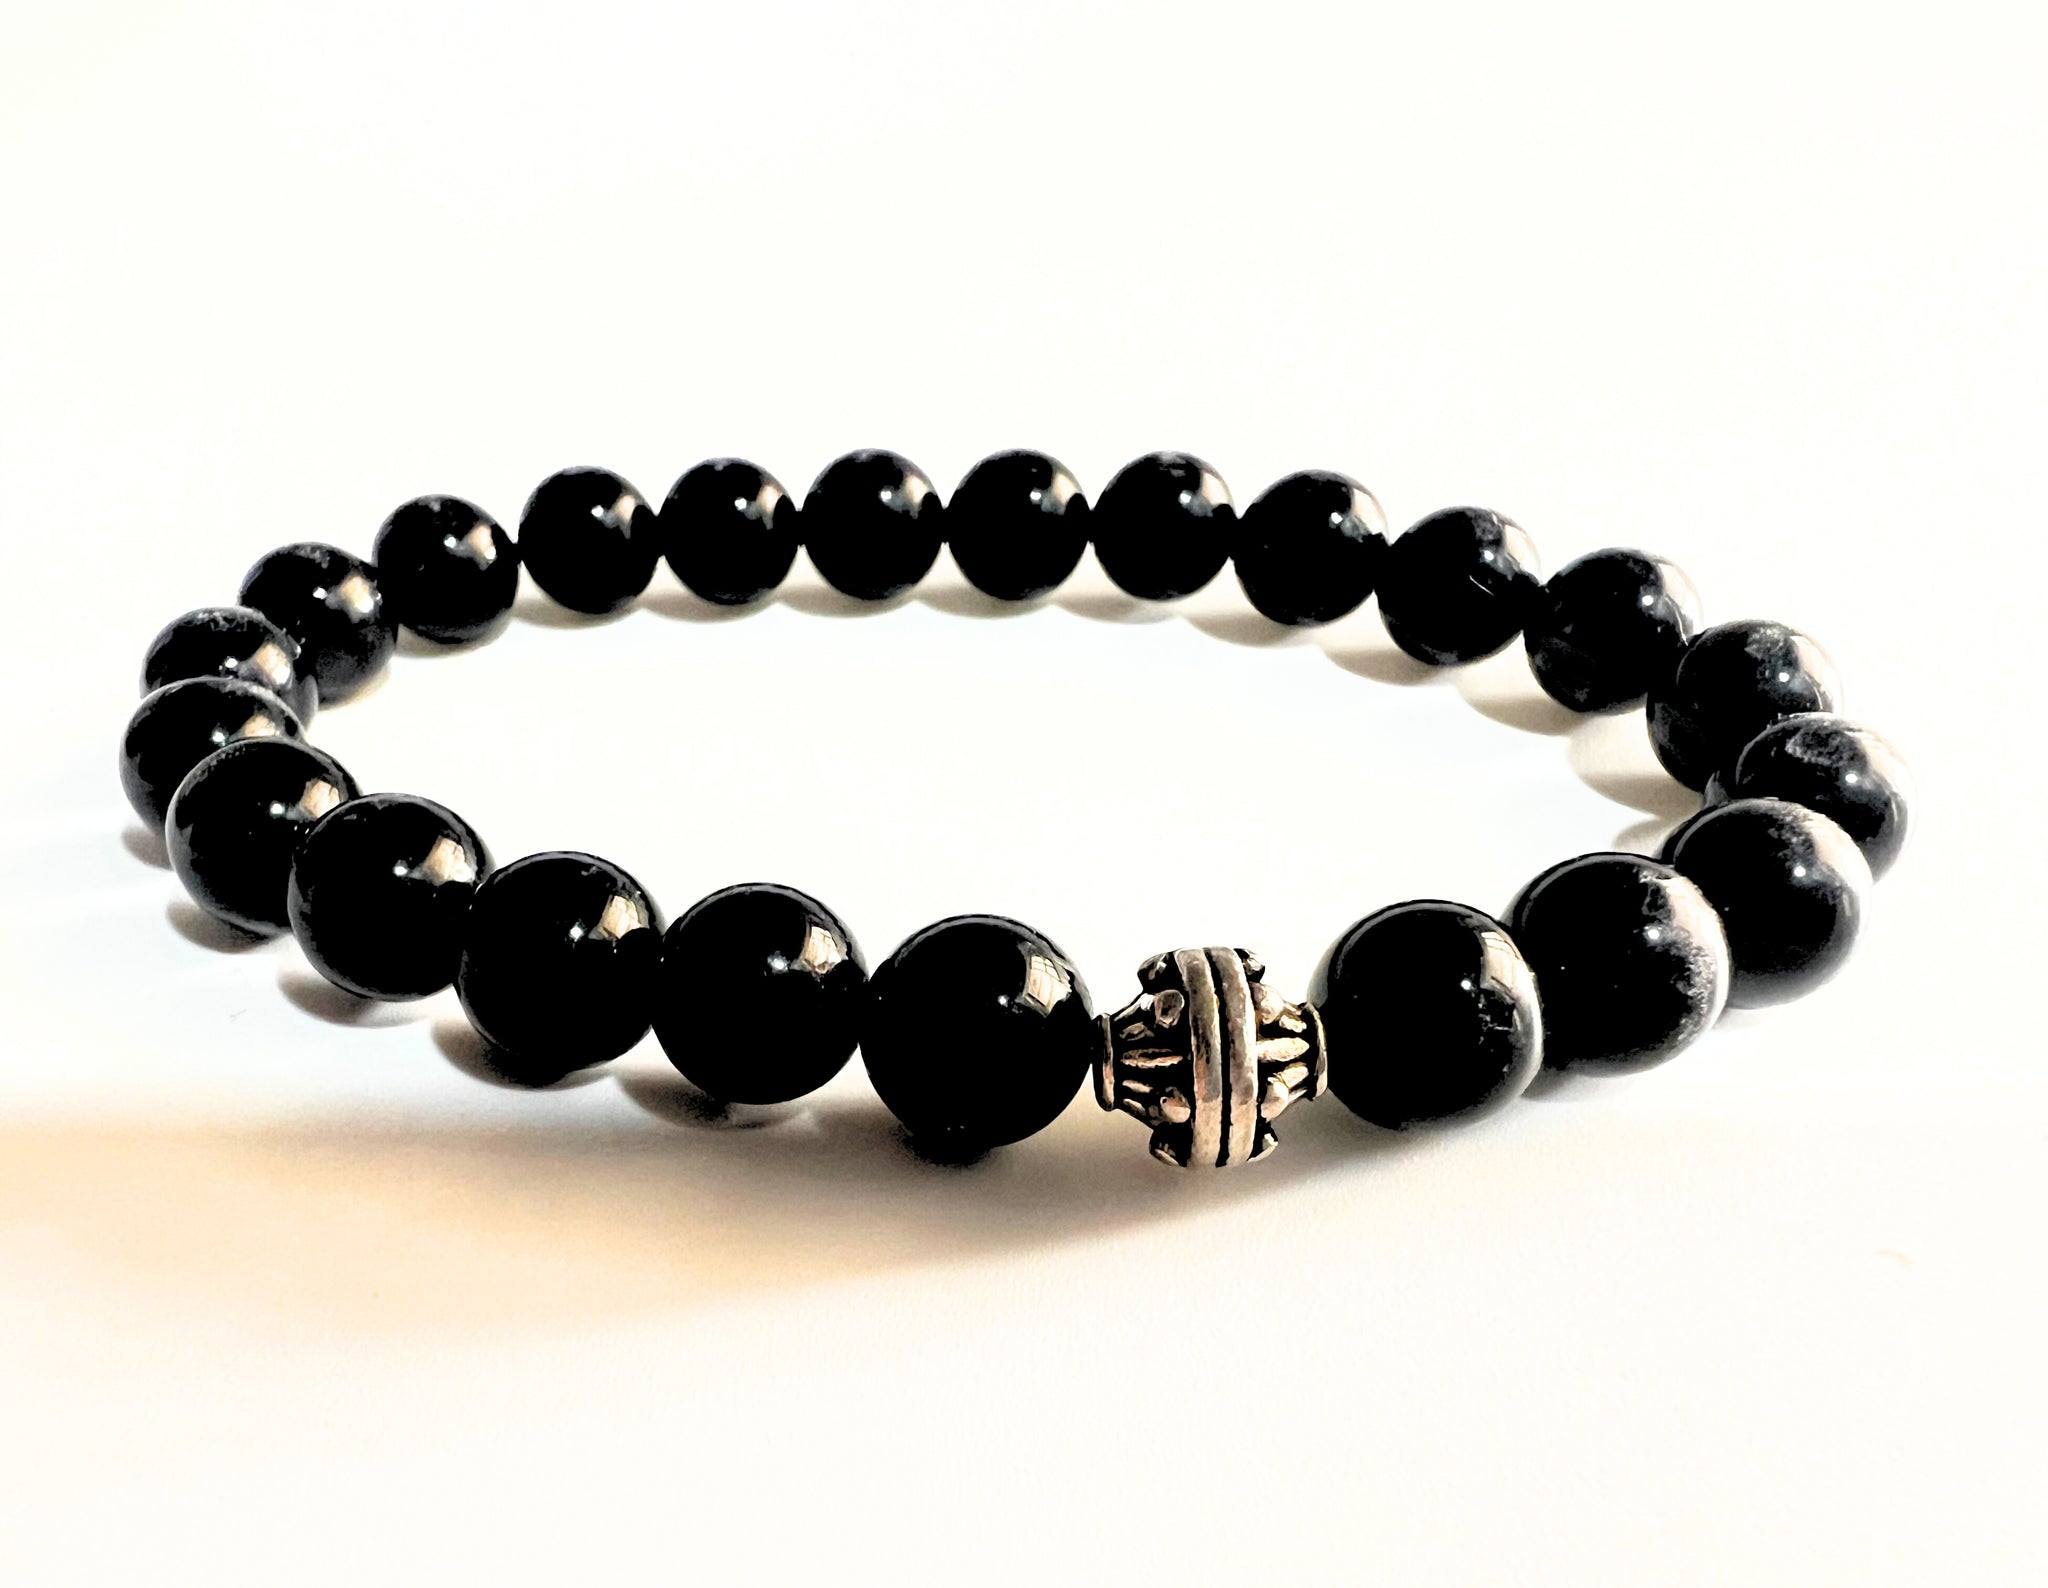 CERTIFIED BLACK TOURMALINE CRYSTAL BRACELET-BLACK COLOUR MEDITATION HEALING ACCESSORY HOME OFFICE GIFT JEWELLERY GIFT